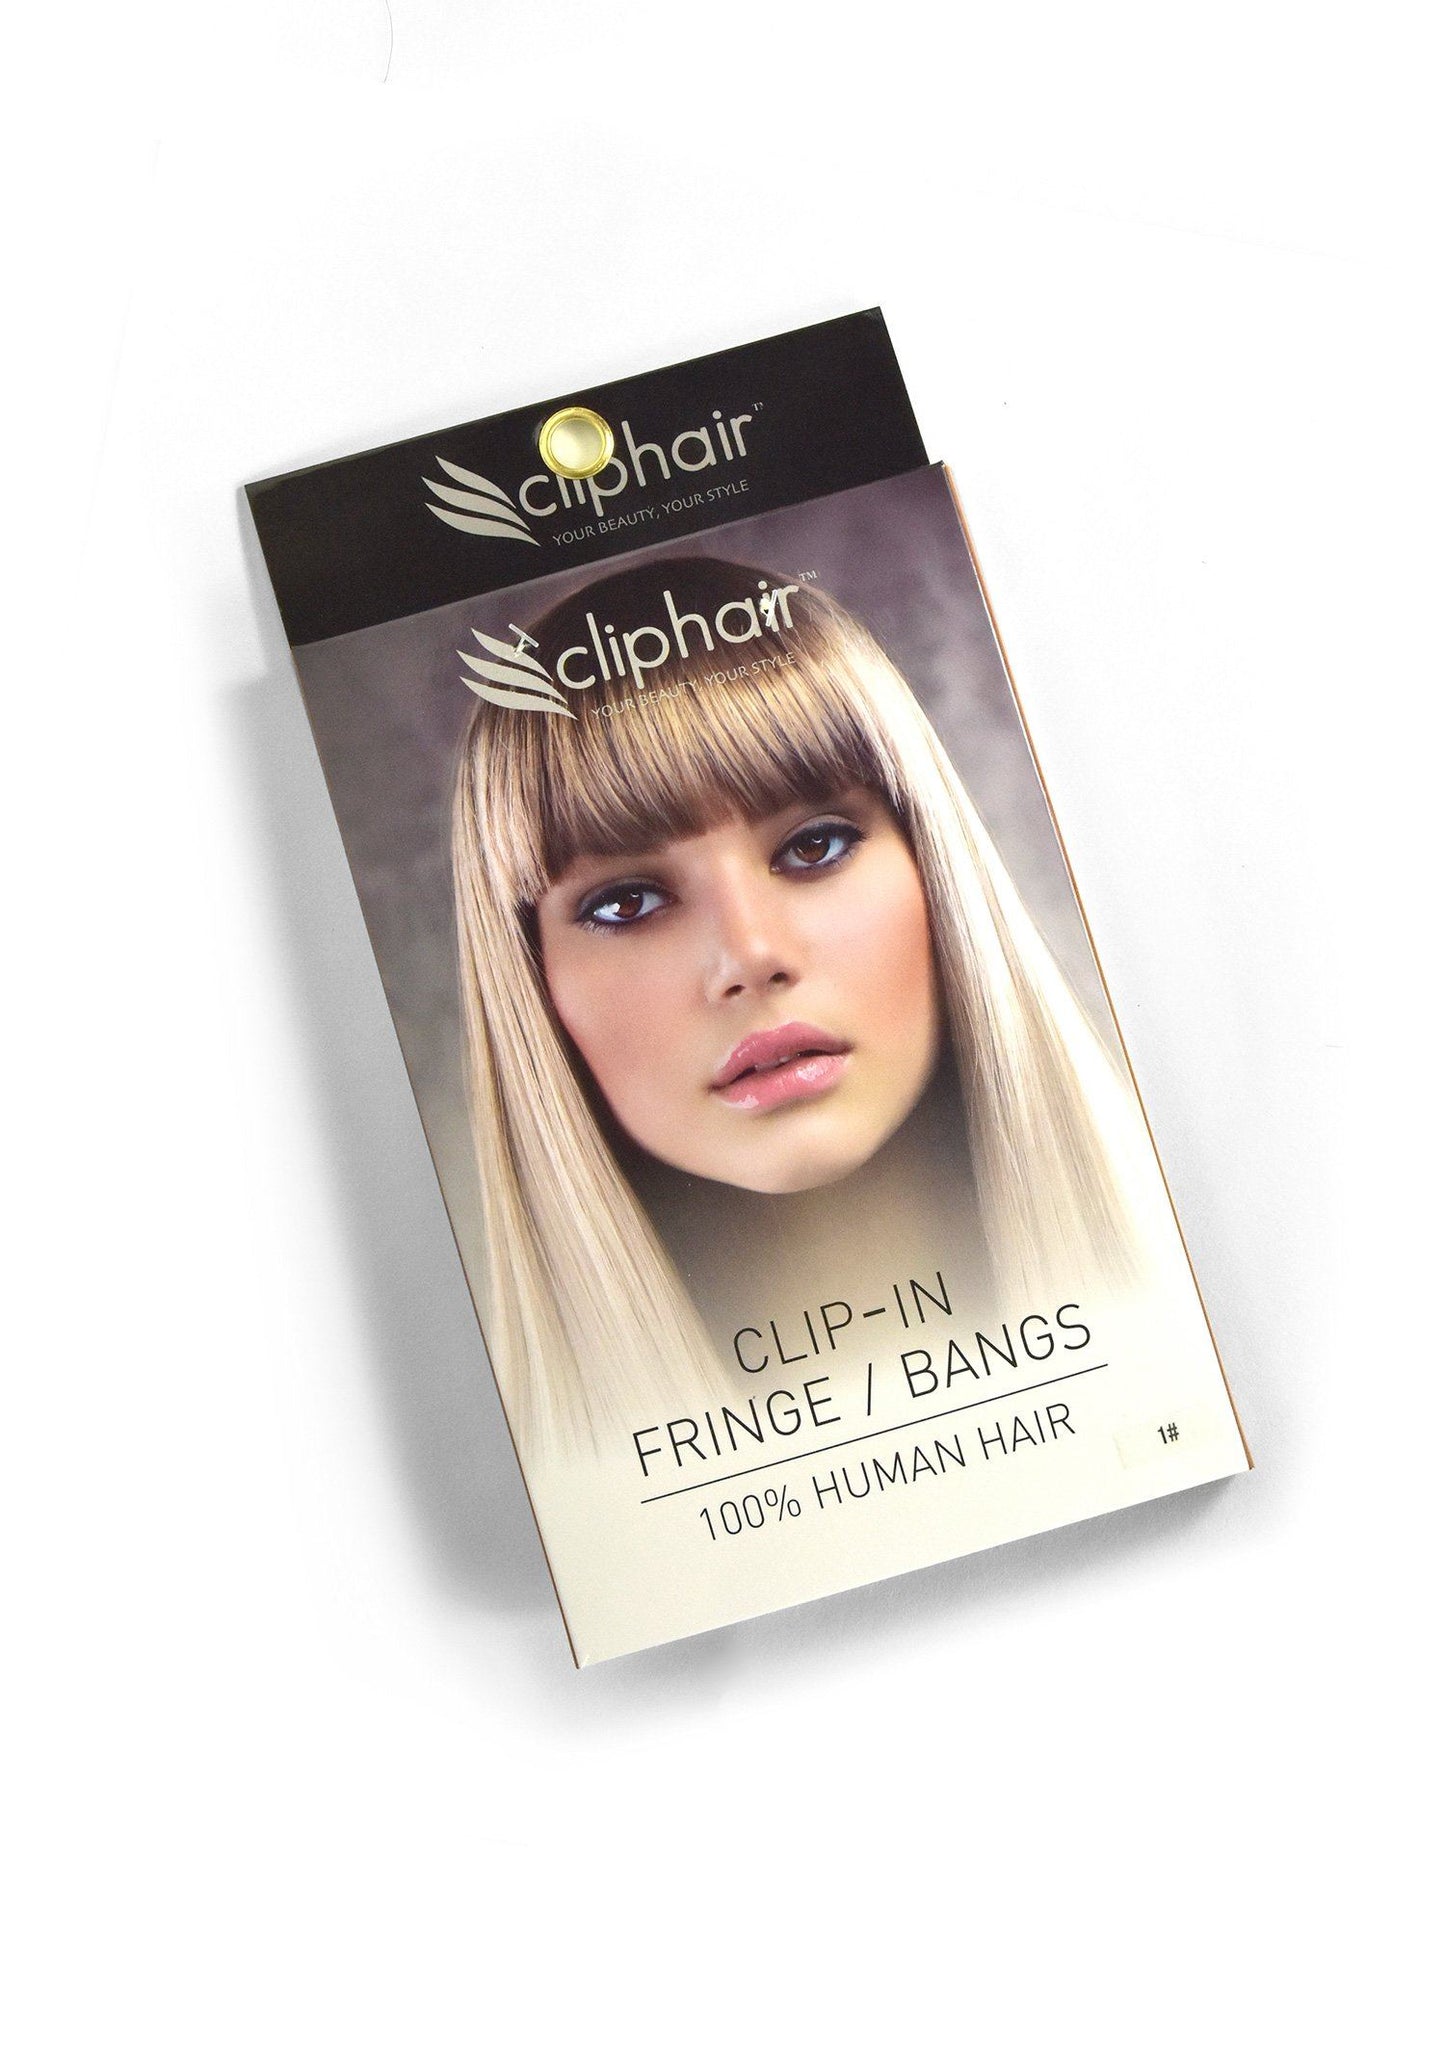 Clip in /on Remy Human Hair Fringe / Bangs - Darkest Brown (#2) Clip In Fringe Extensions cliphair 